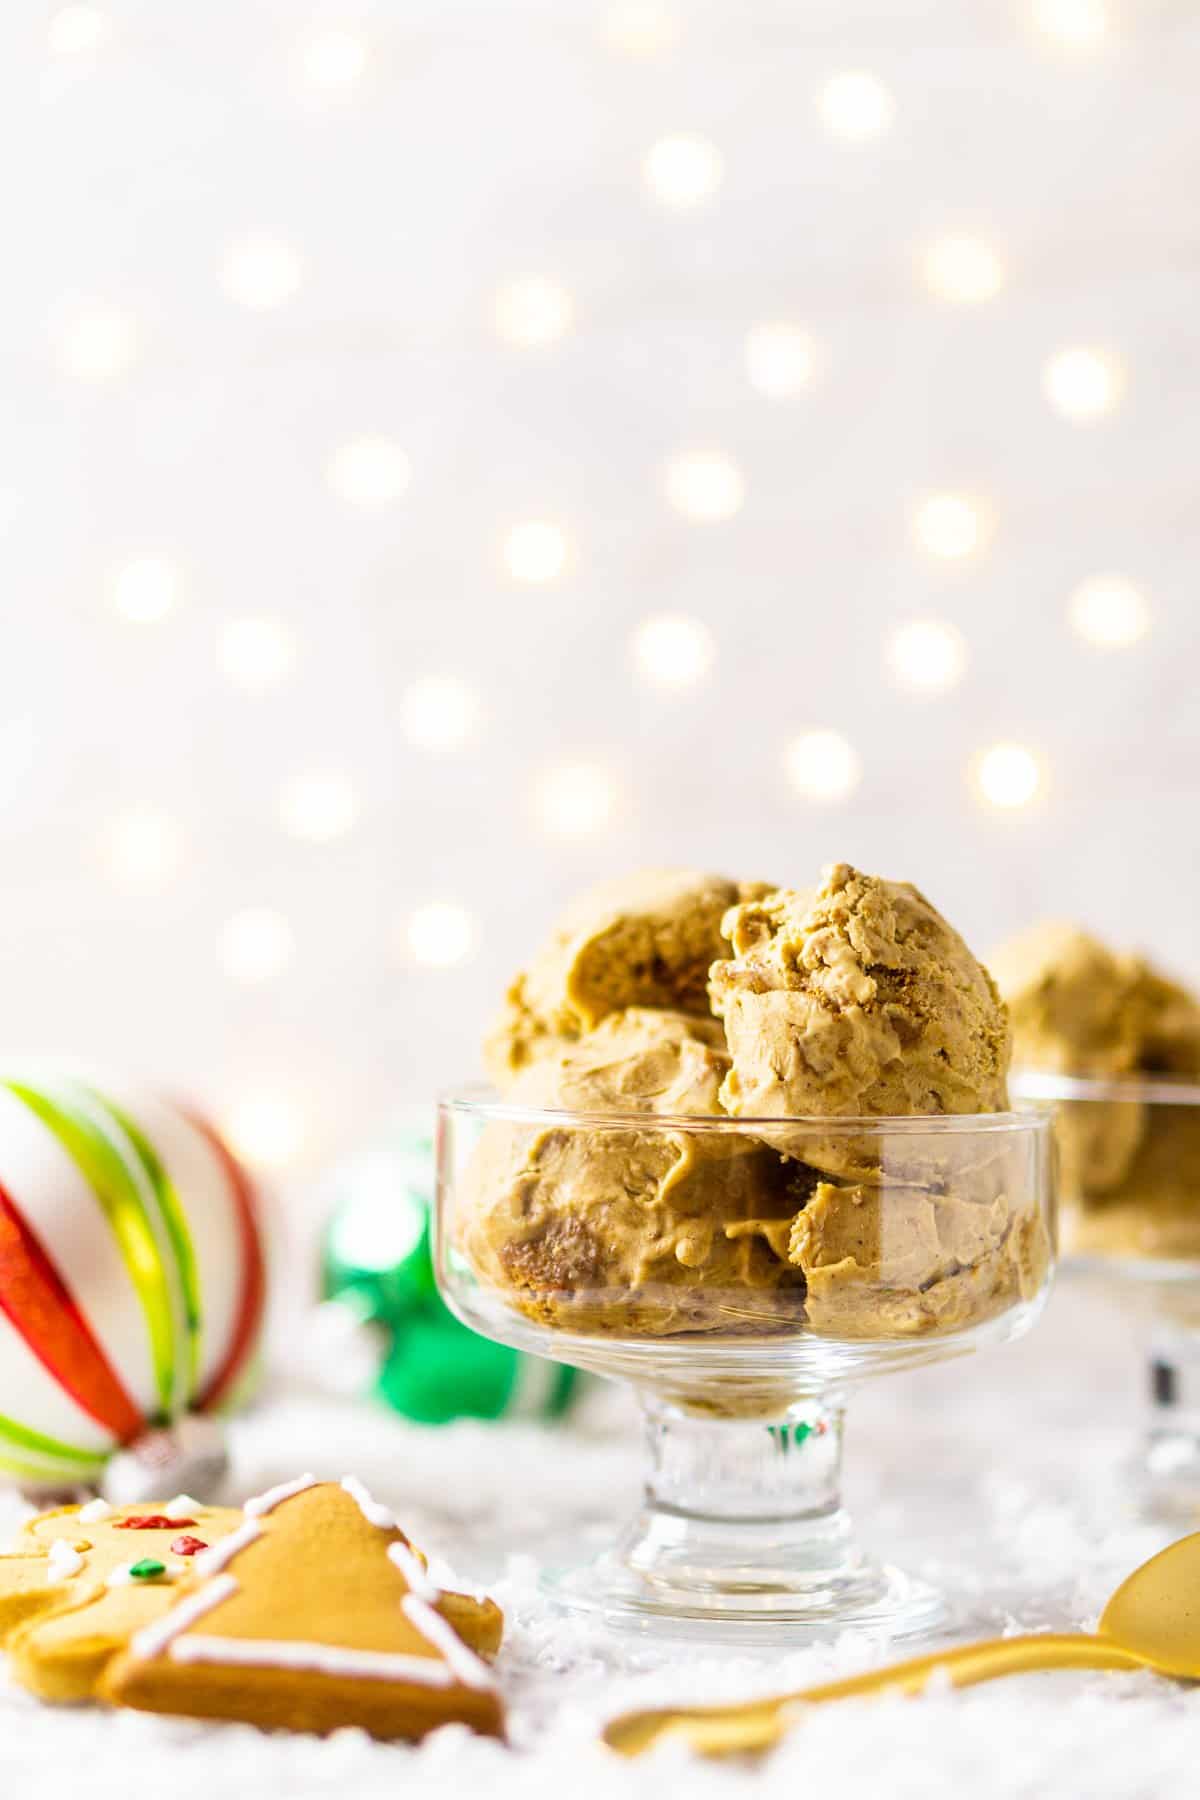 A close-up shot of the gingerbread ice cream with ornaments behind it on a white backdrop.